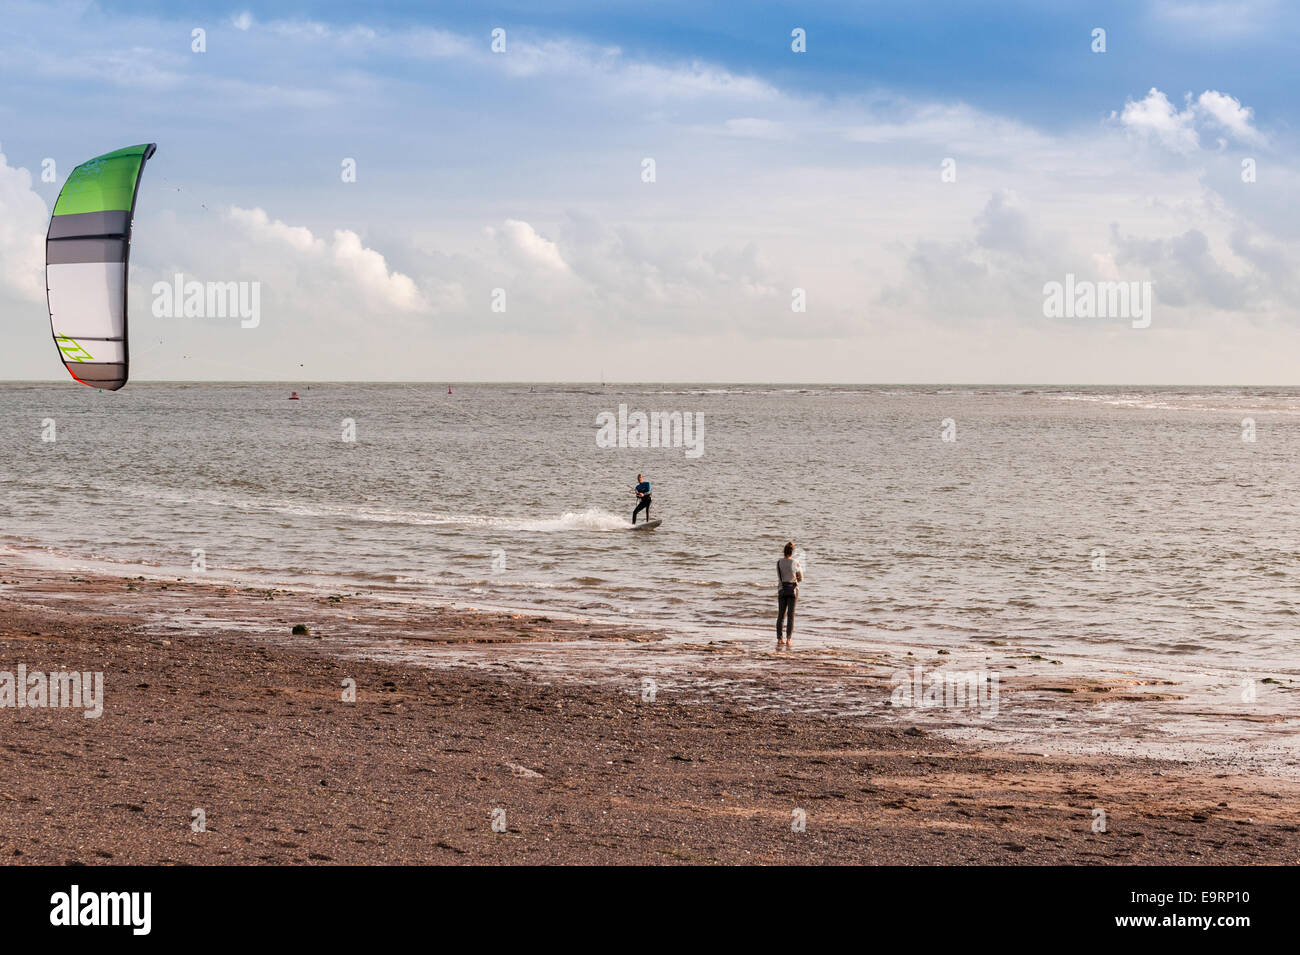 A kite surfer on a windy day at Exmouth in Devon, UK. Good conditions for kite surfing. A female companion waits on the shore. Stock Photo